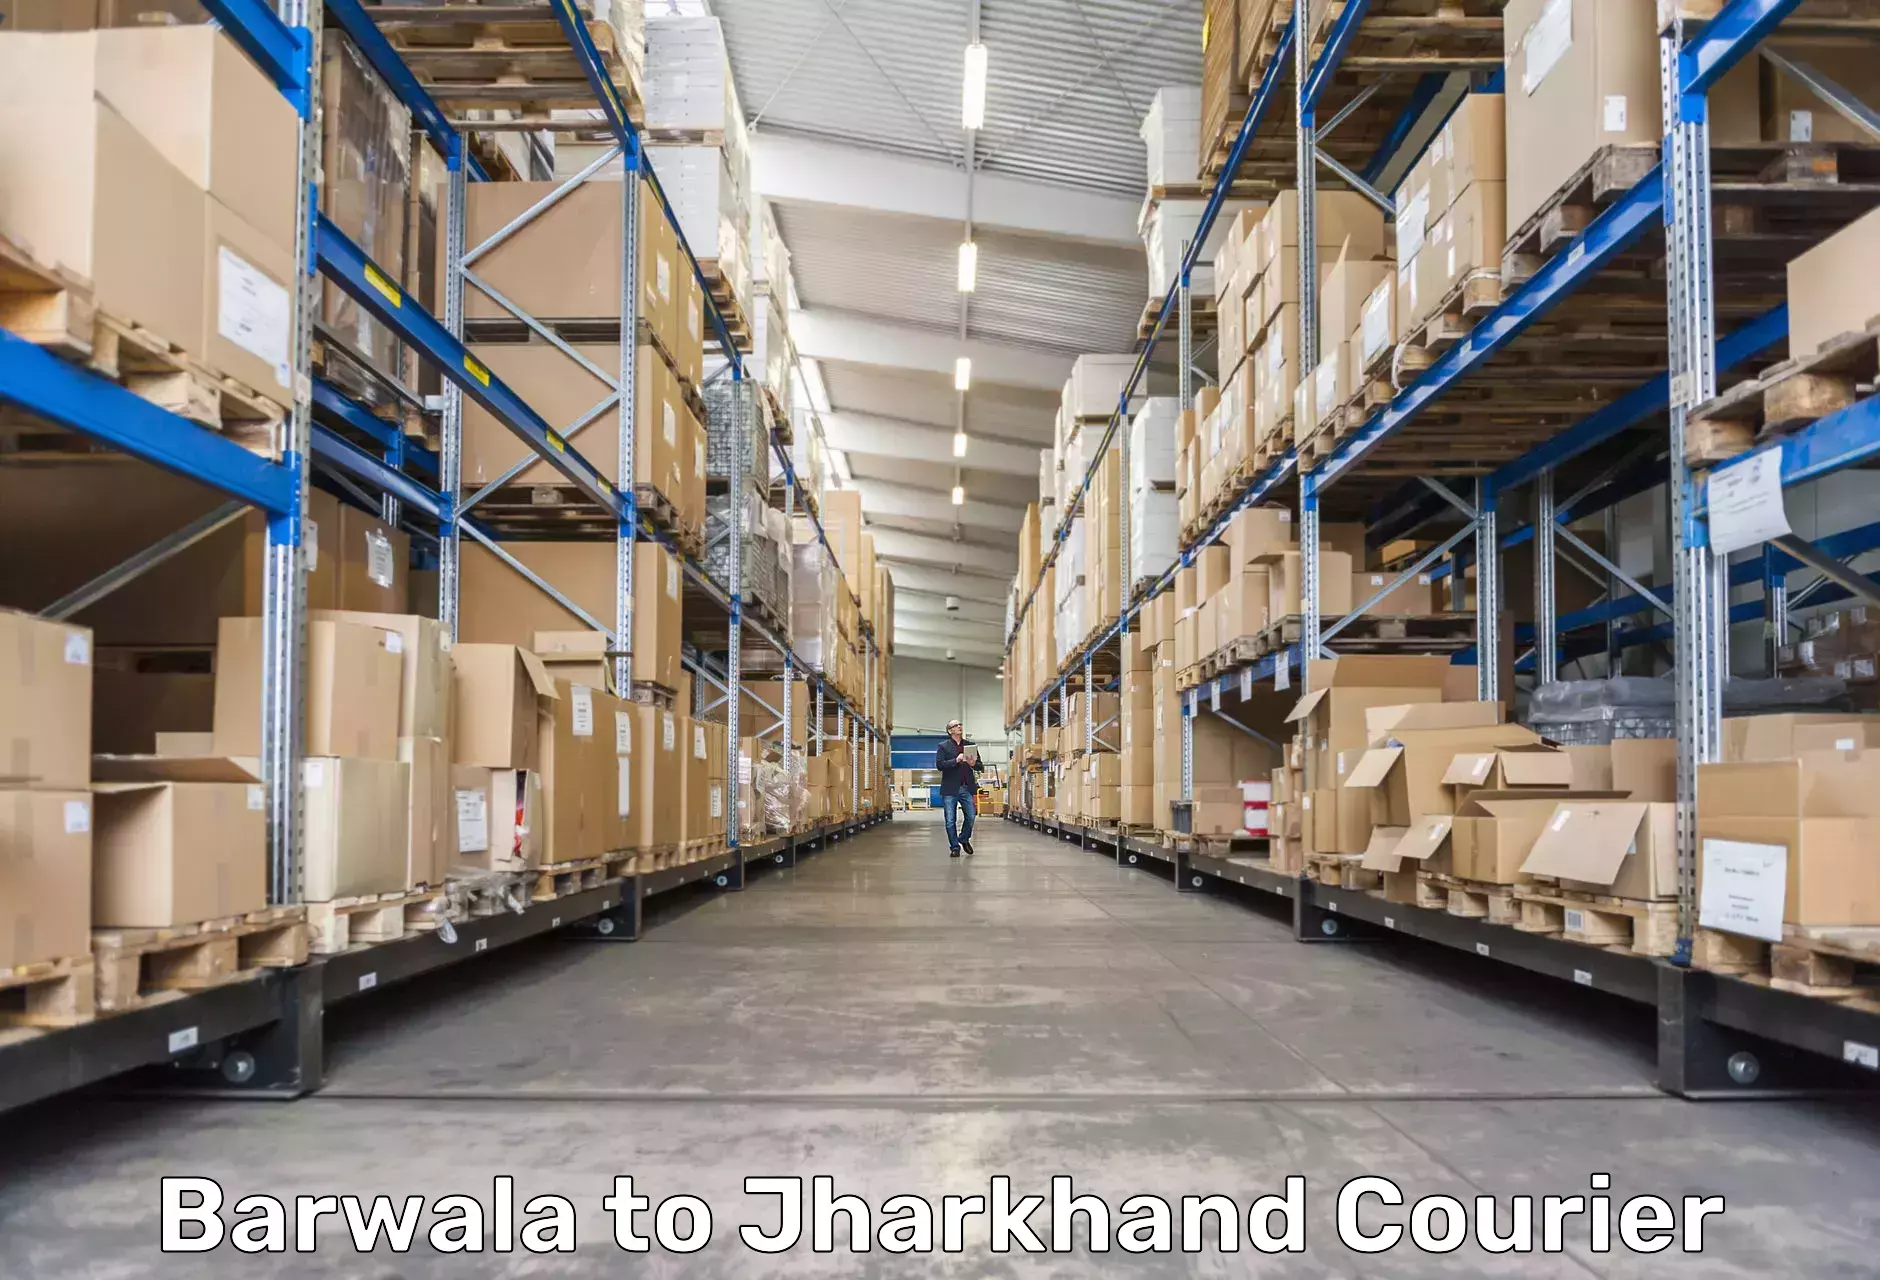 Premium courier solutions Barwala to Kedla